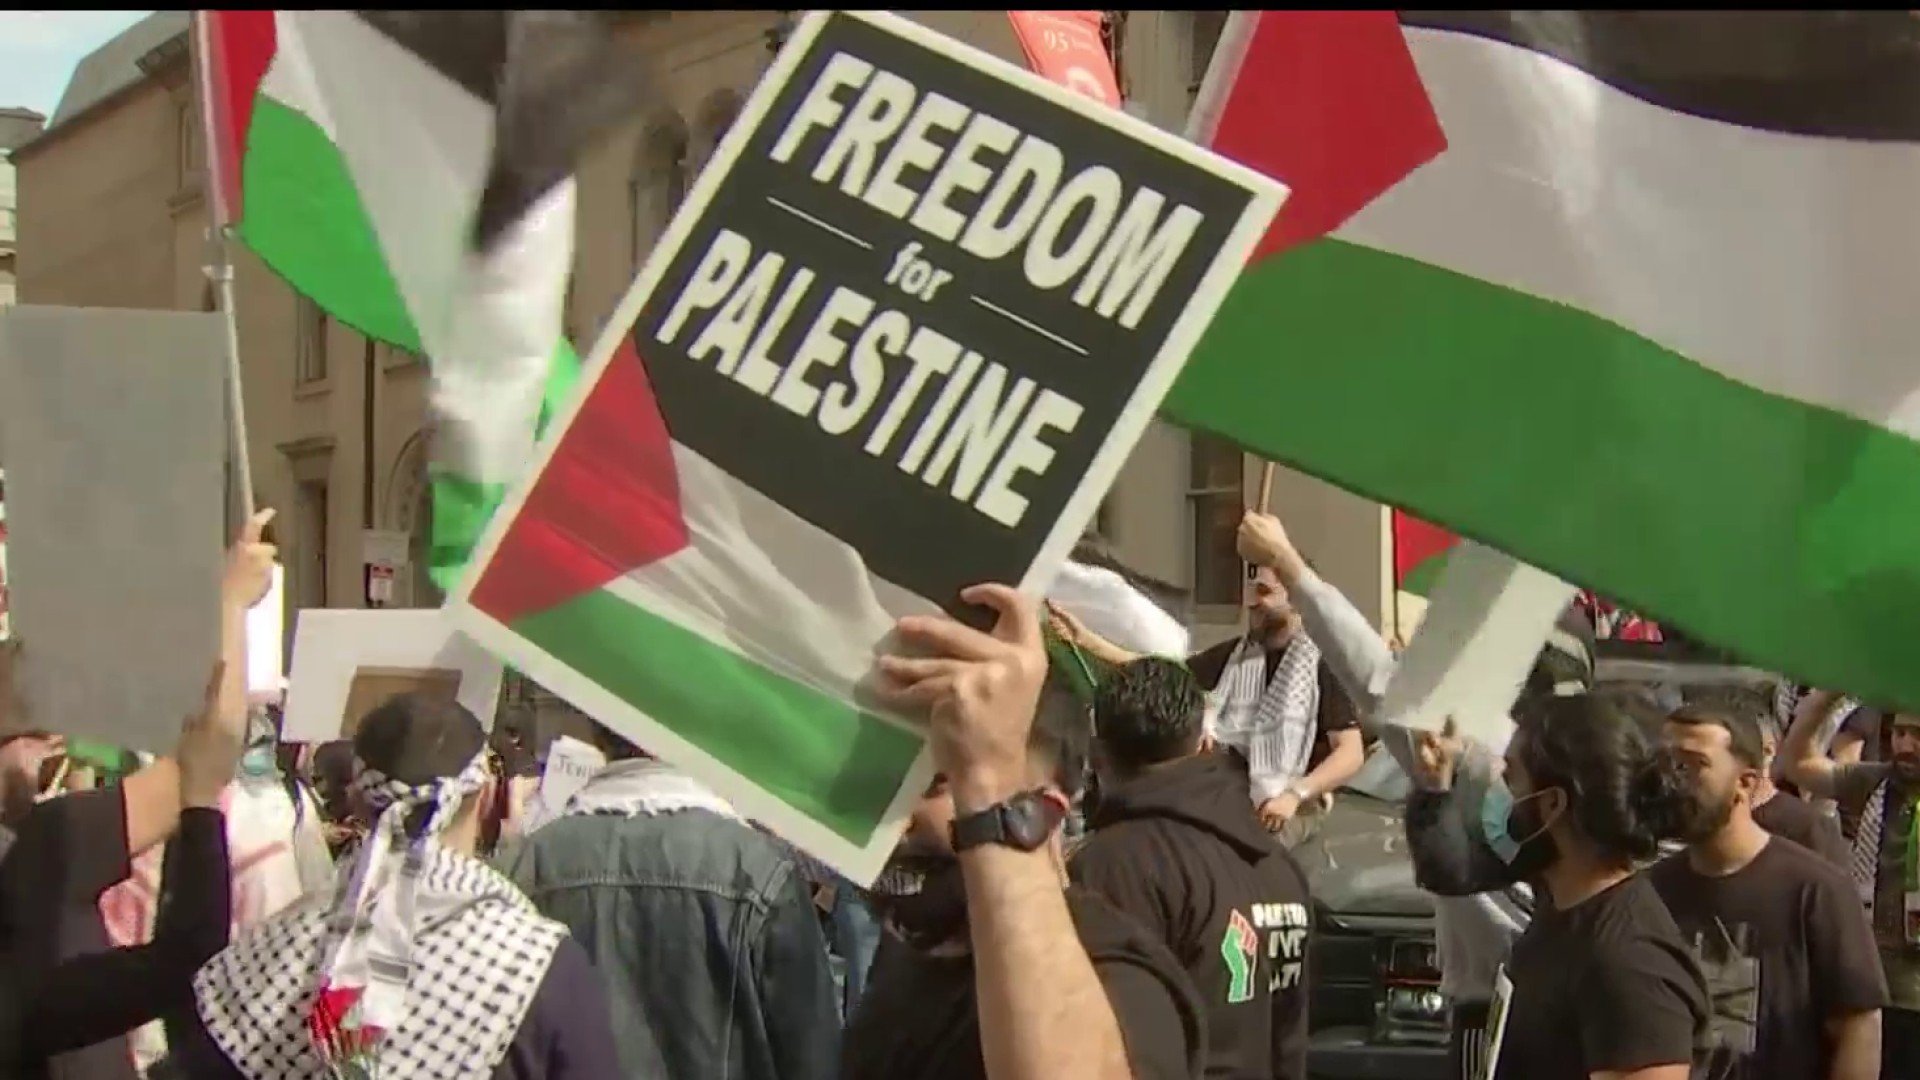 Pro-Palestine protesters at a march in Philadelphia. Palestinian flags in the background while someone holds up a sign that says "Freedom for Palestine."